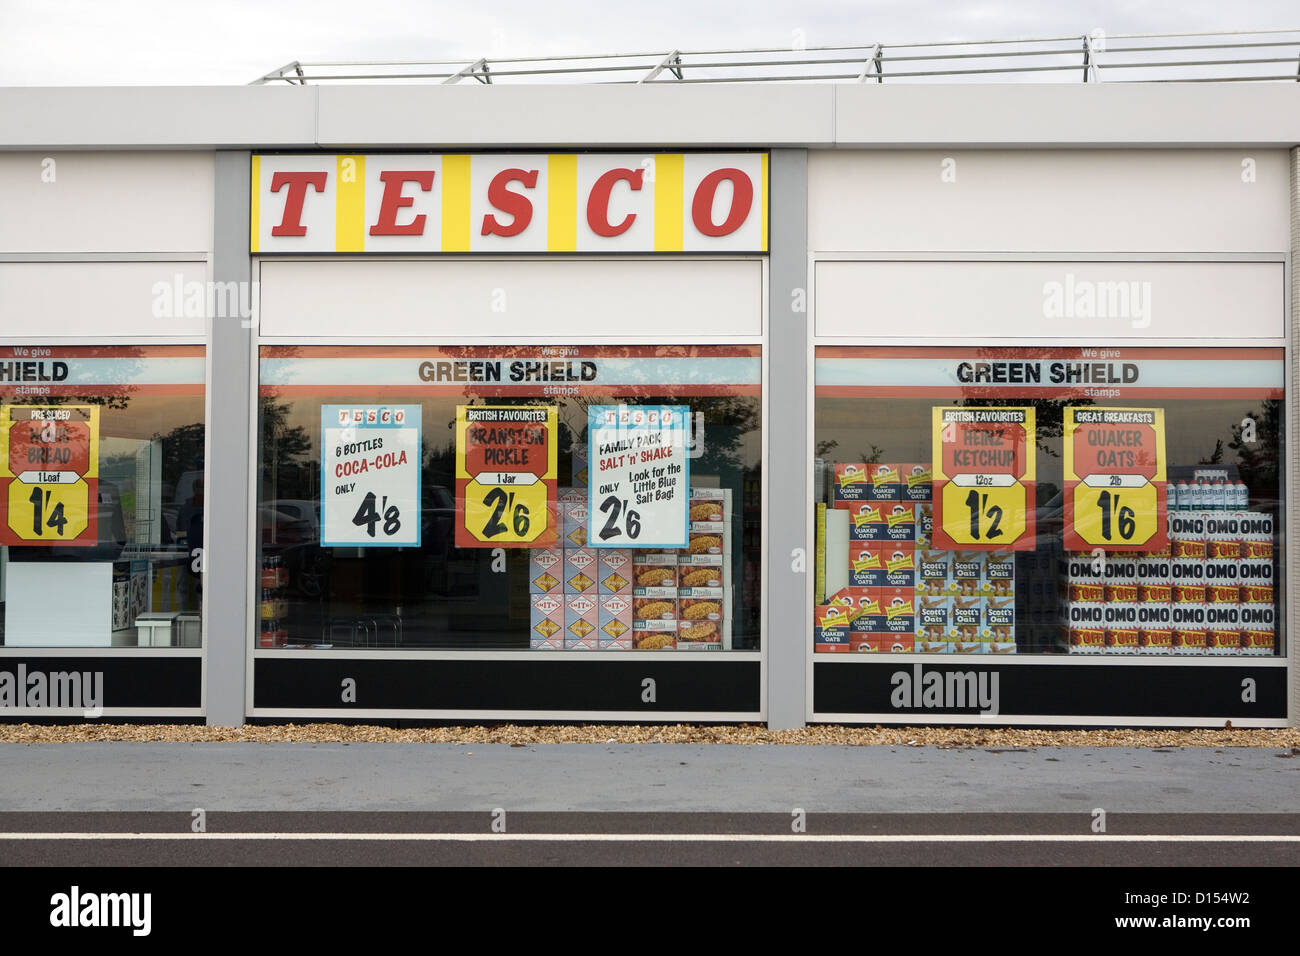 An old styled Tesco store front Stock Photo - Alamy